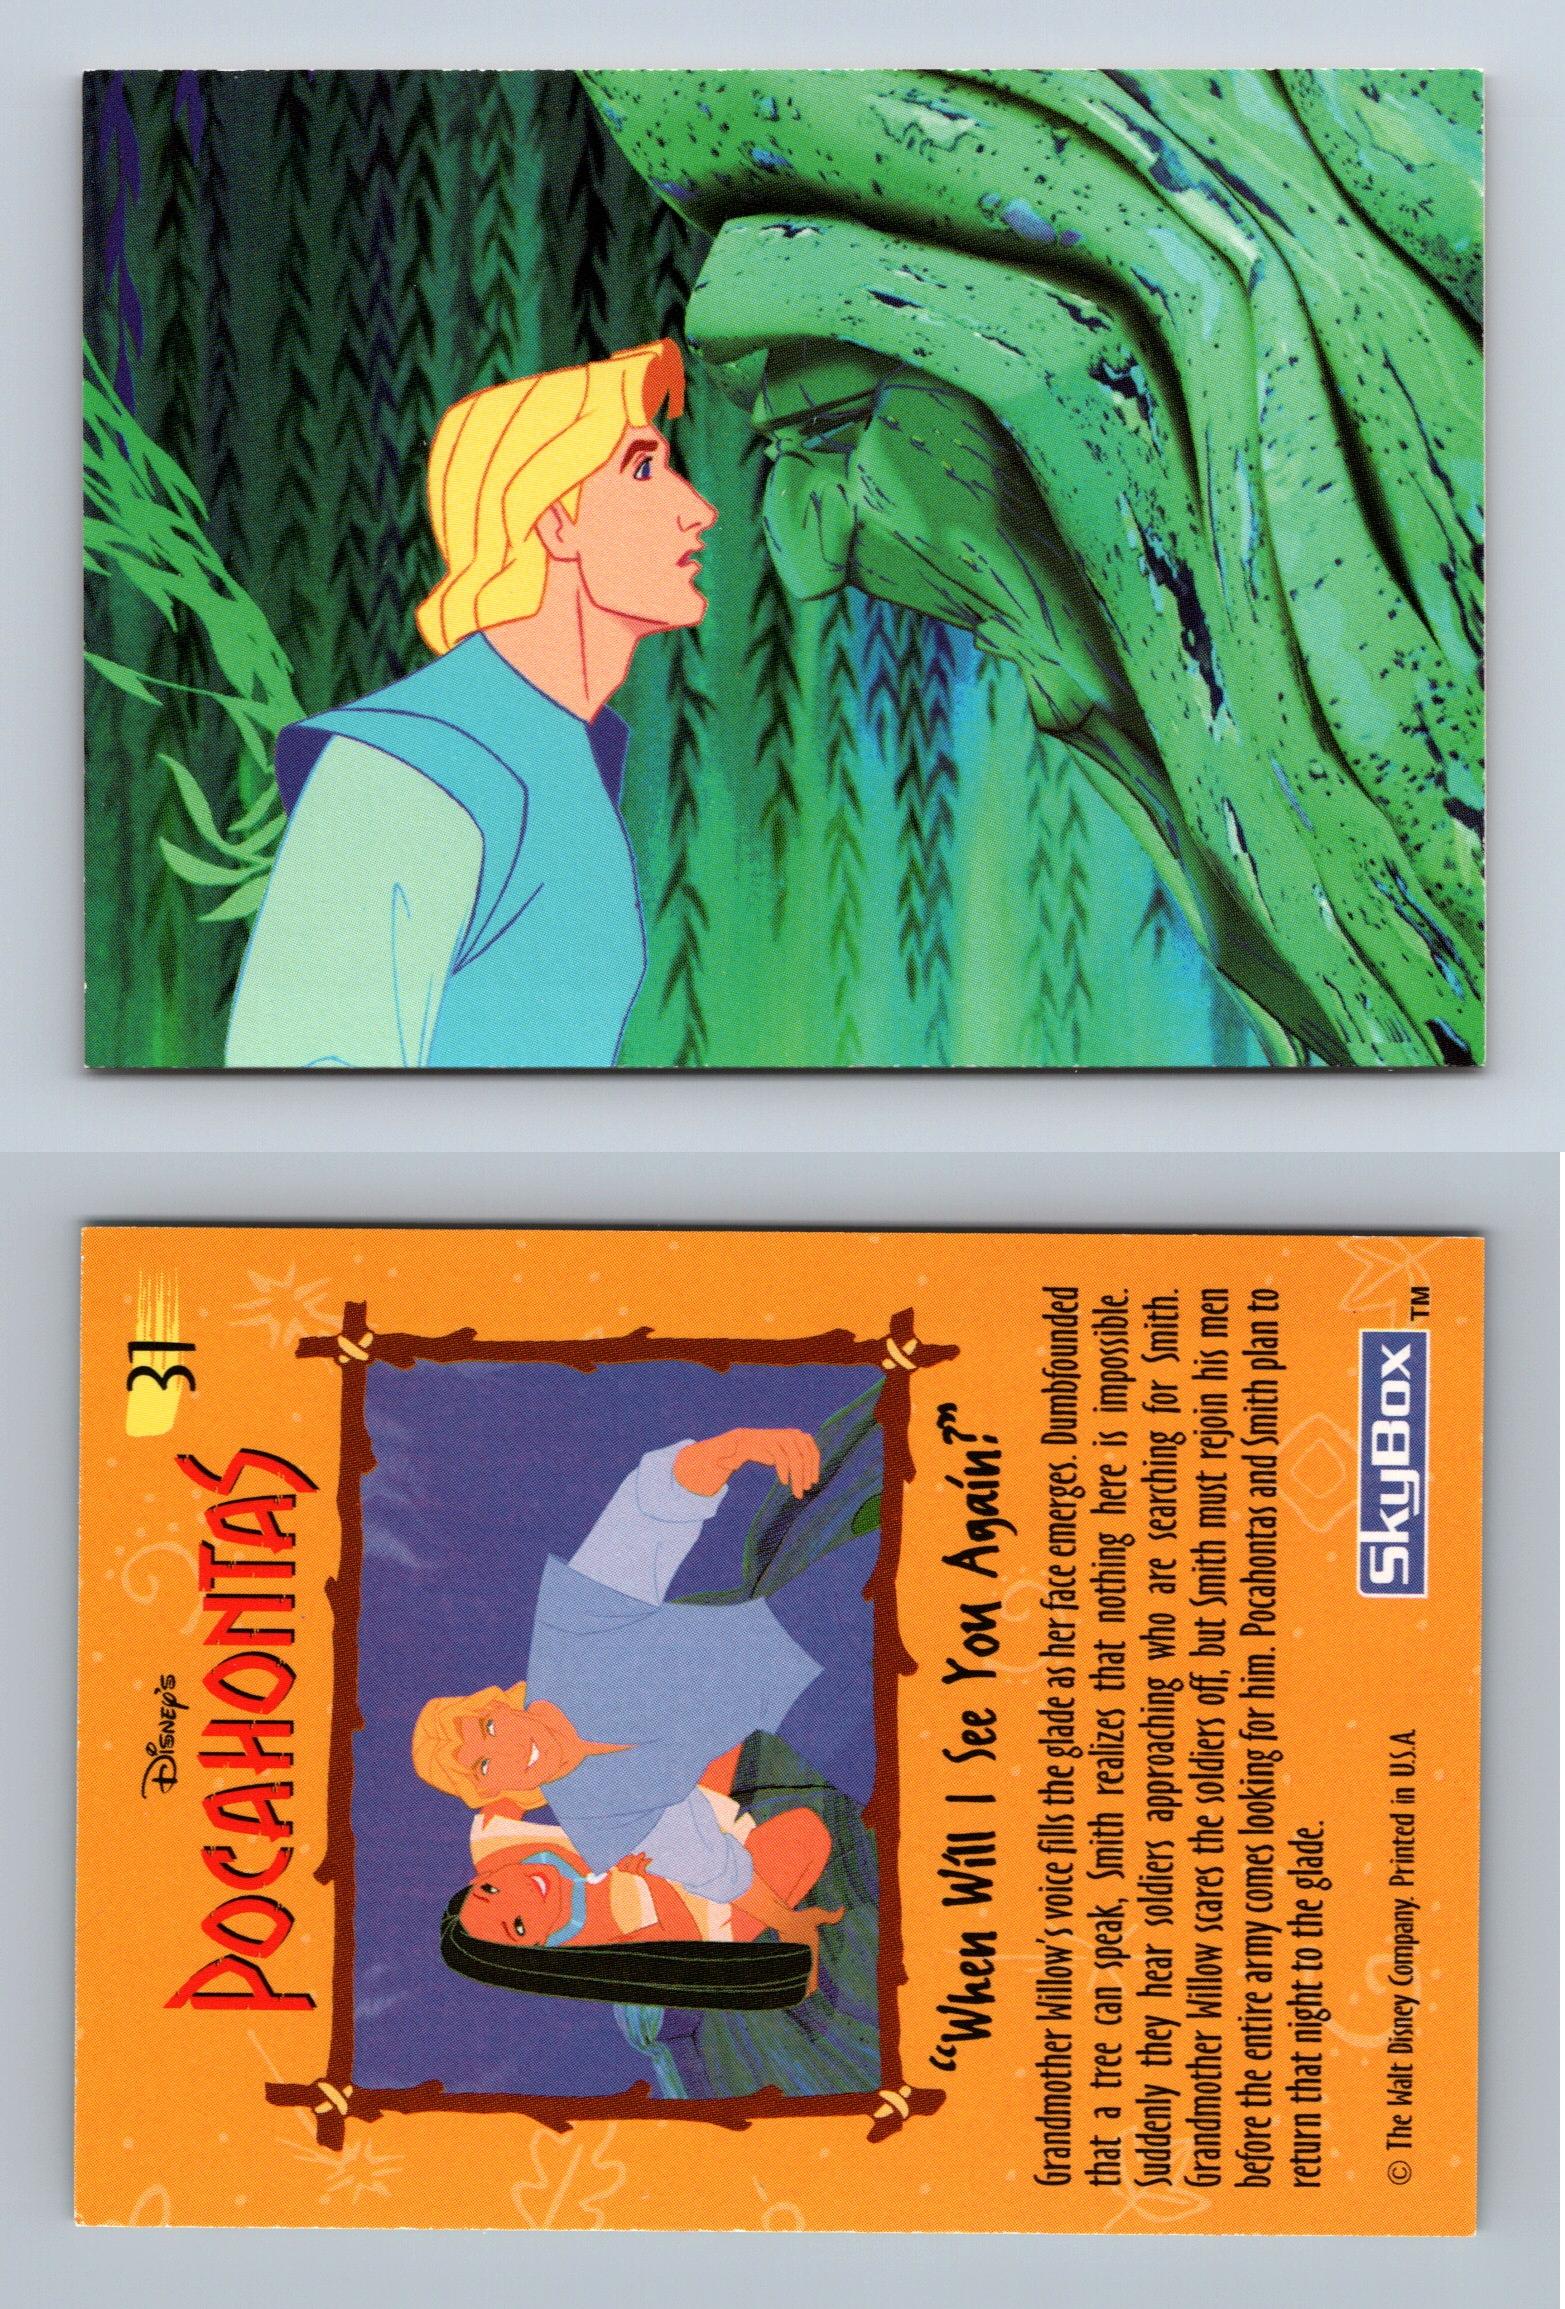 When Will I See You Again #31 Disney Pocahontas 1995 Skybox Trade Card C2601 